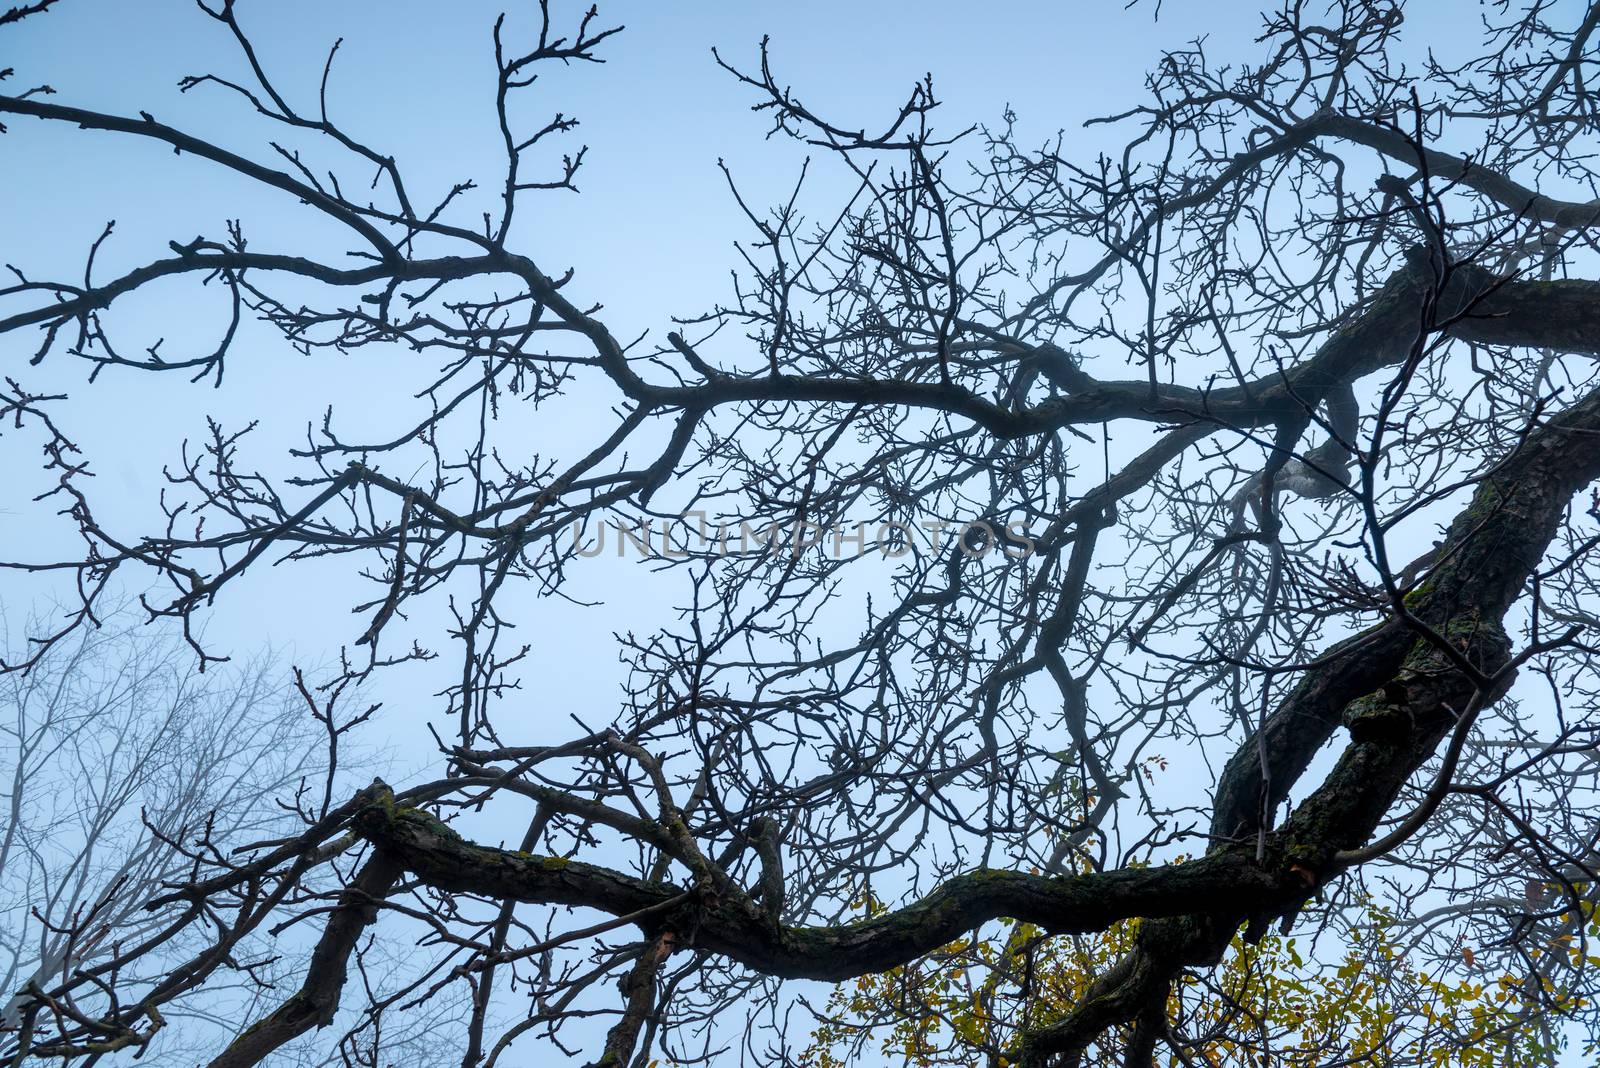 Branches of a tree without leaves in late autumn against the sky on a cloudy day